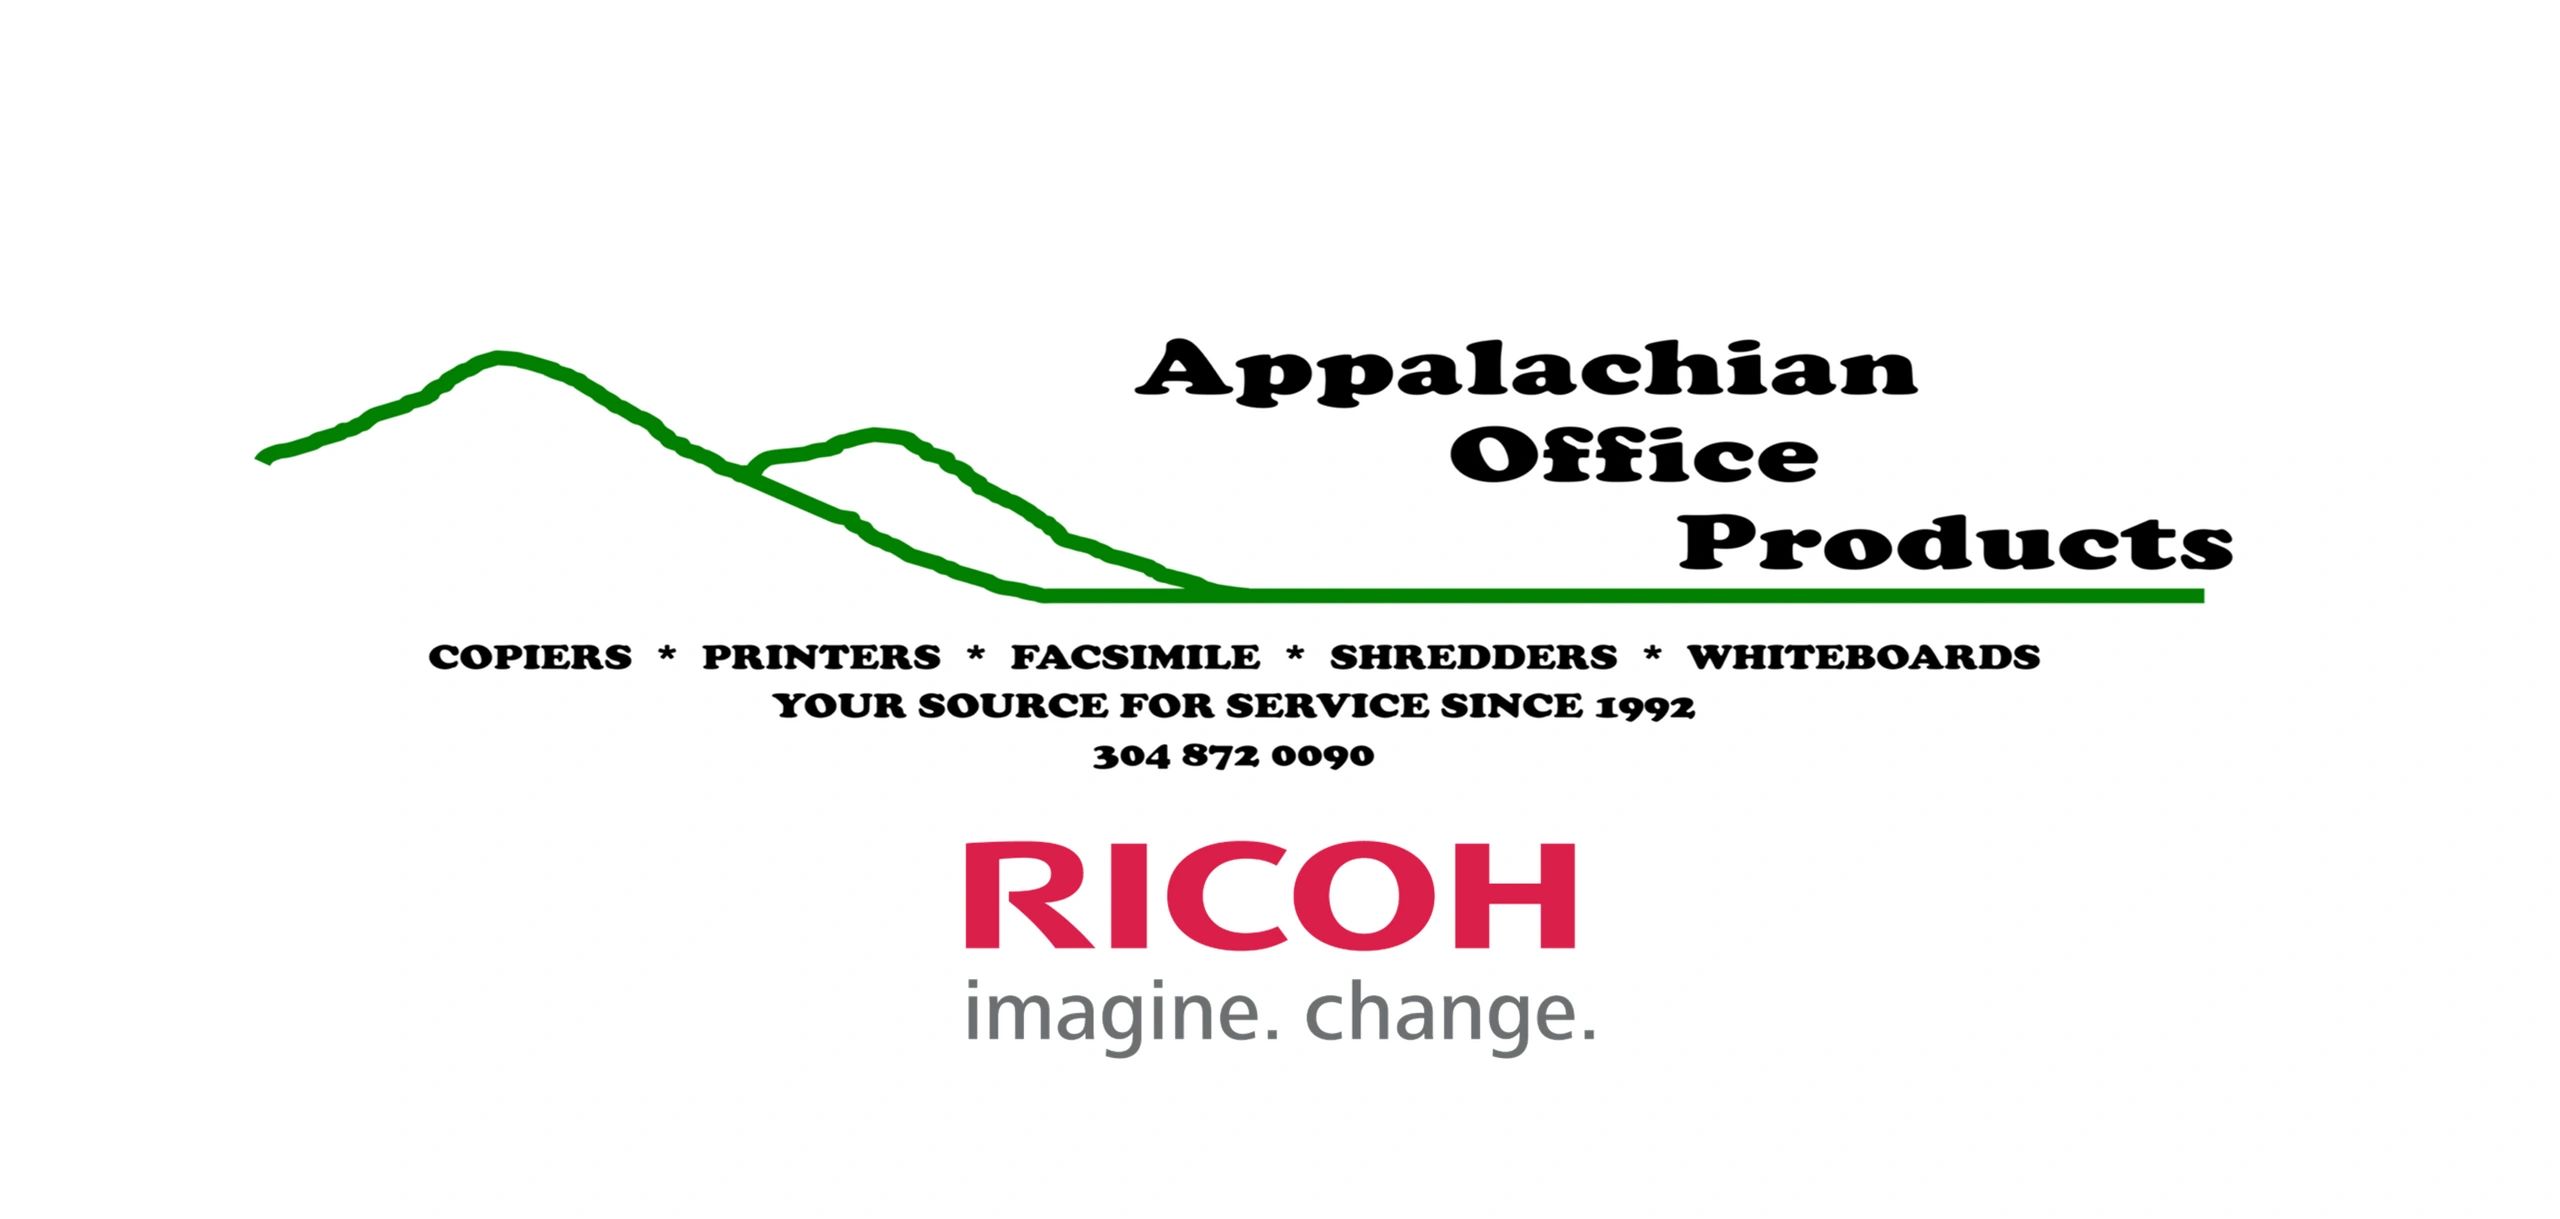 Appalachian Office Products - Home